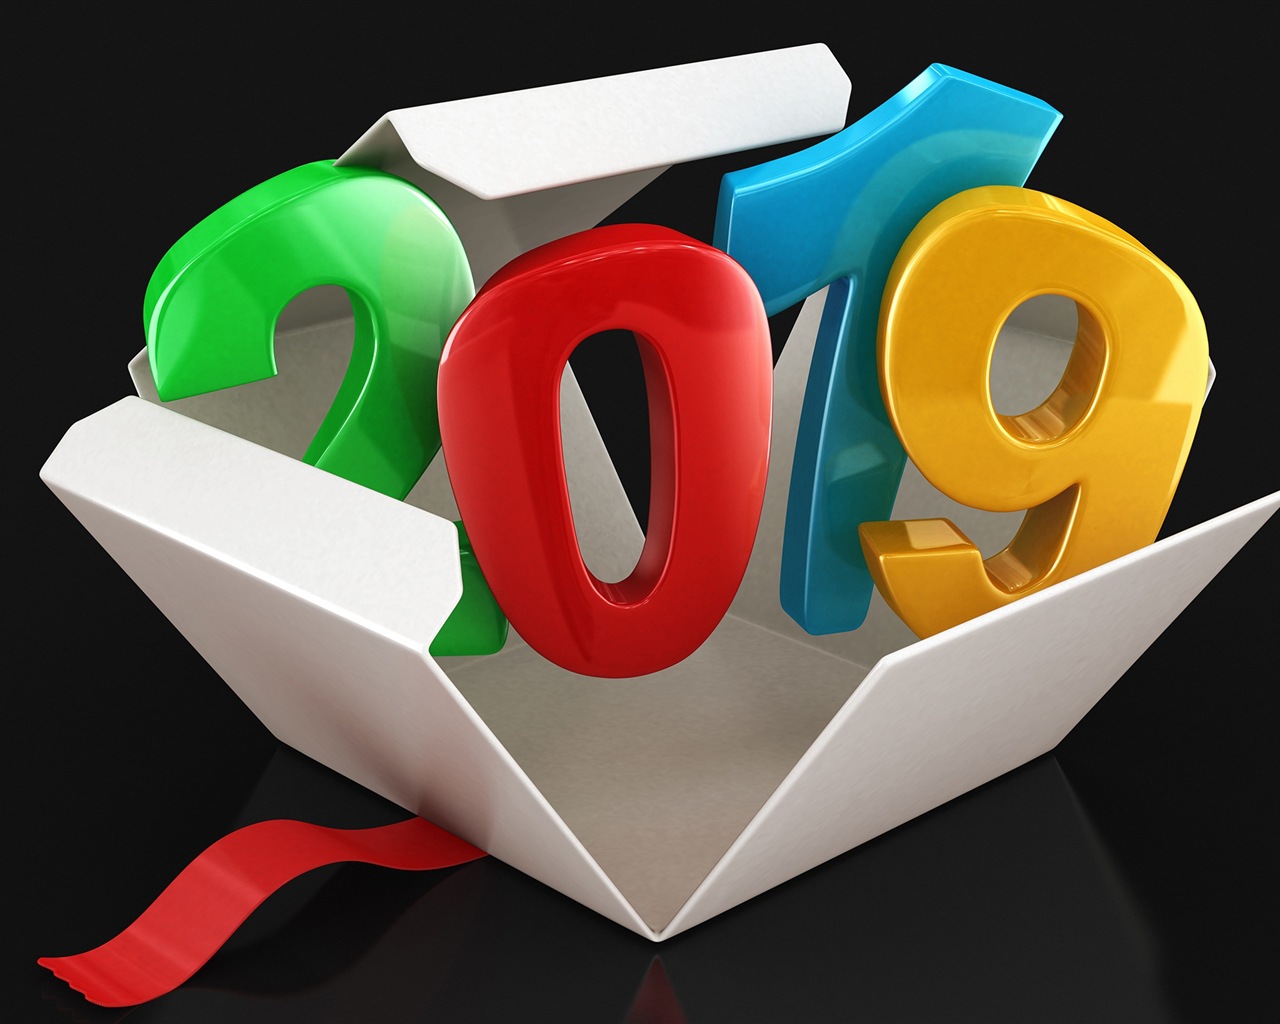 Happy New Year 2019 HD wallpapers #2 - 1280x1024